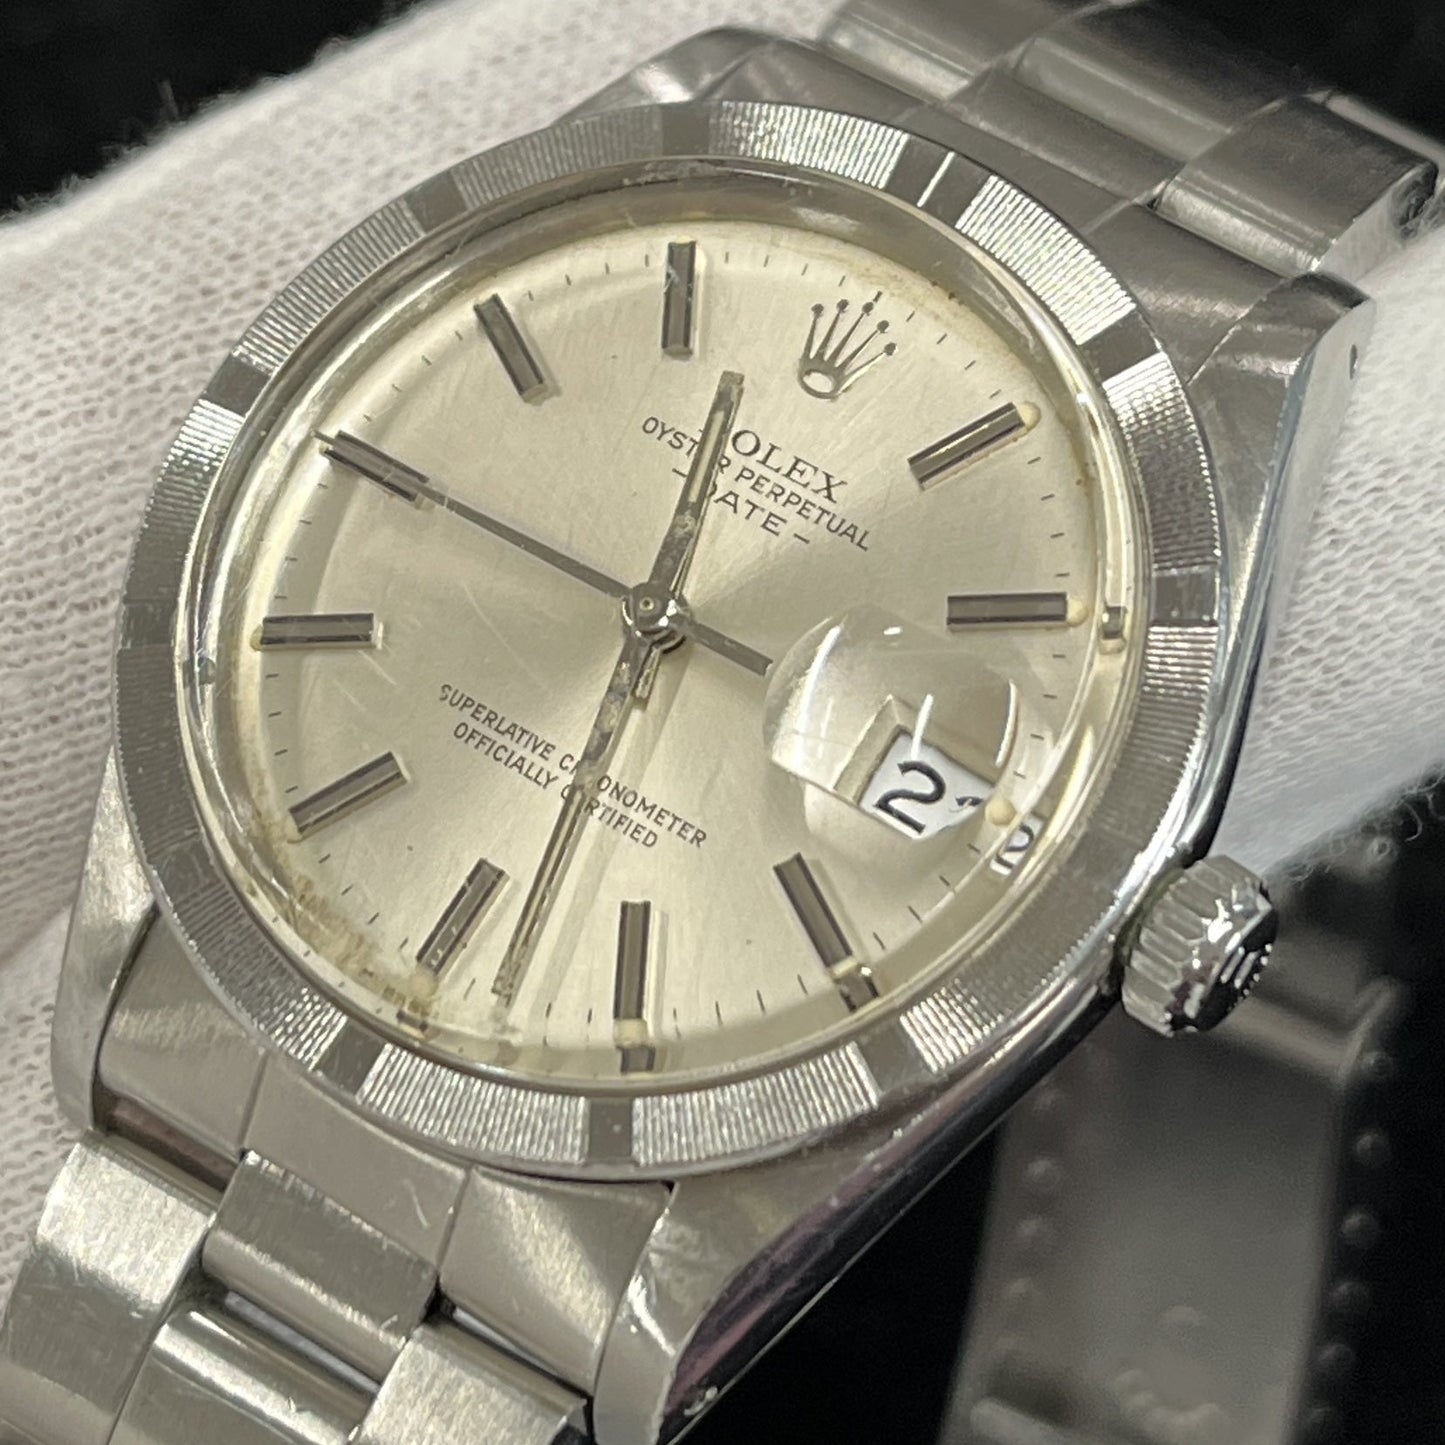 15010 Oyster perpetual Date No. 83 cal.3035 2R-X01-01040